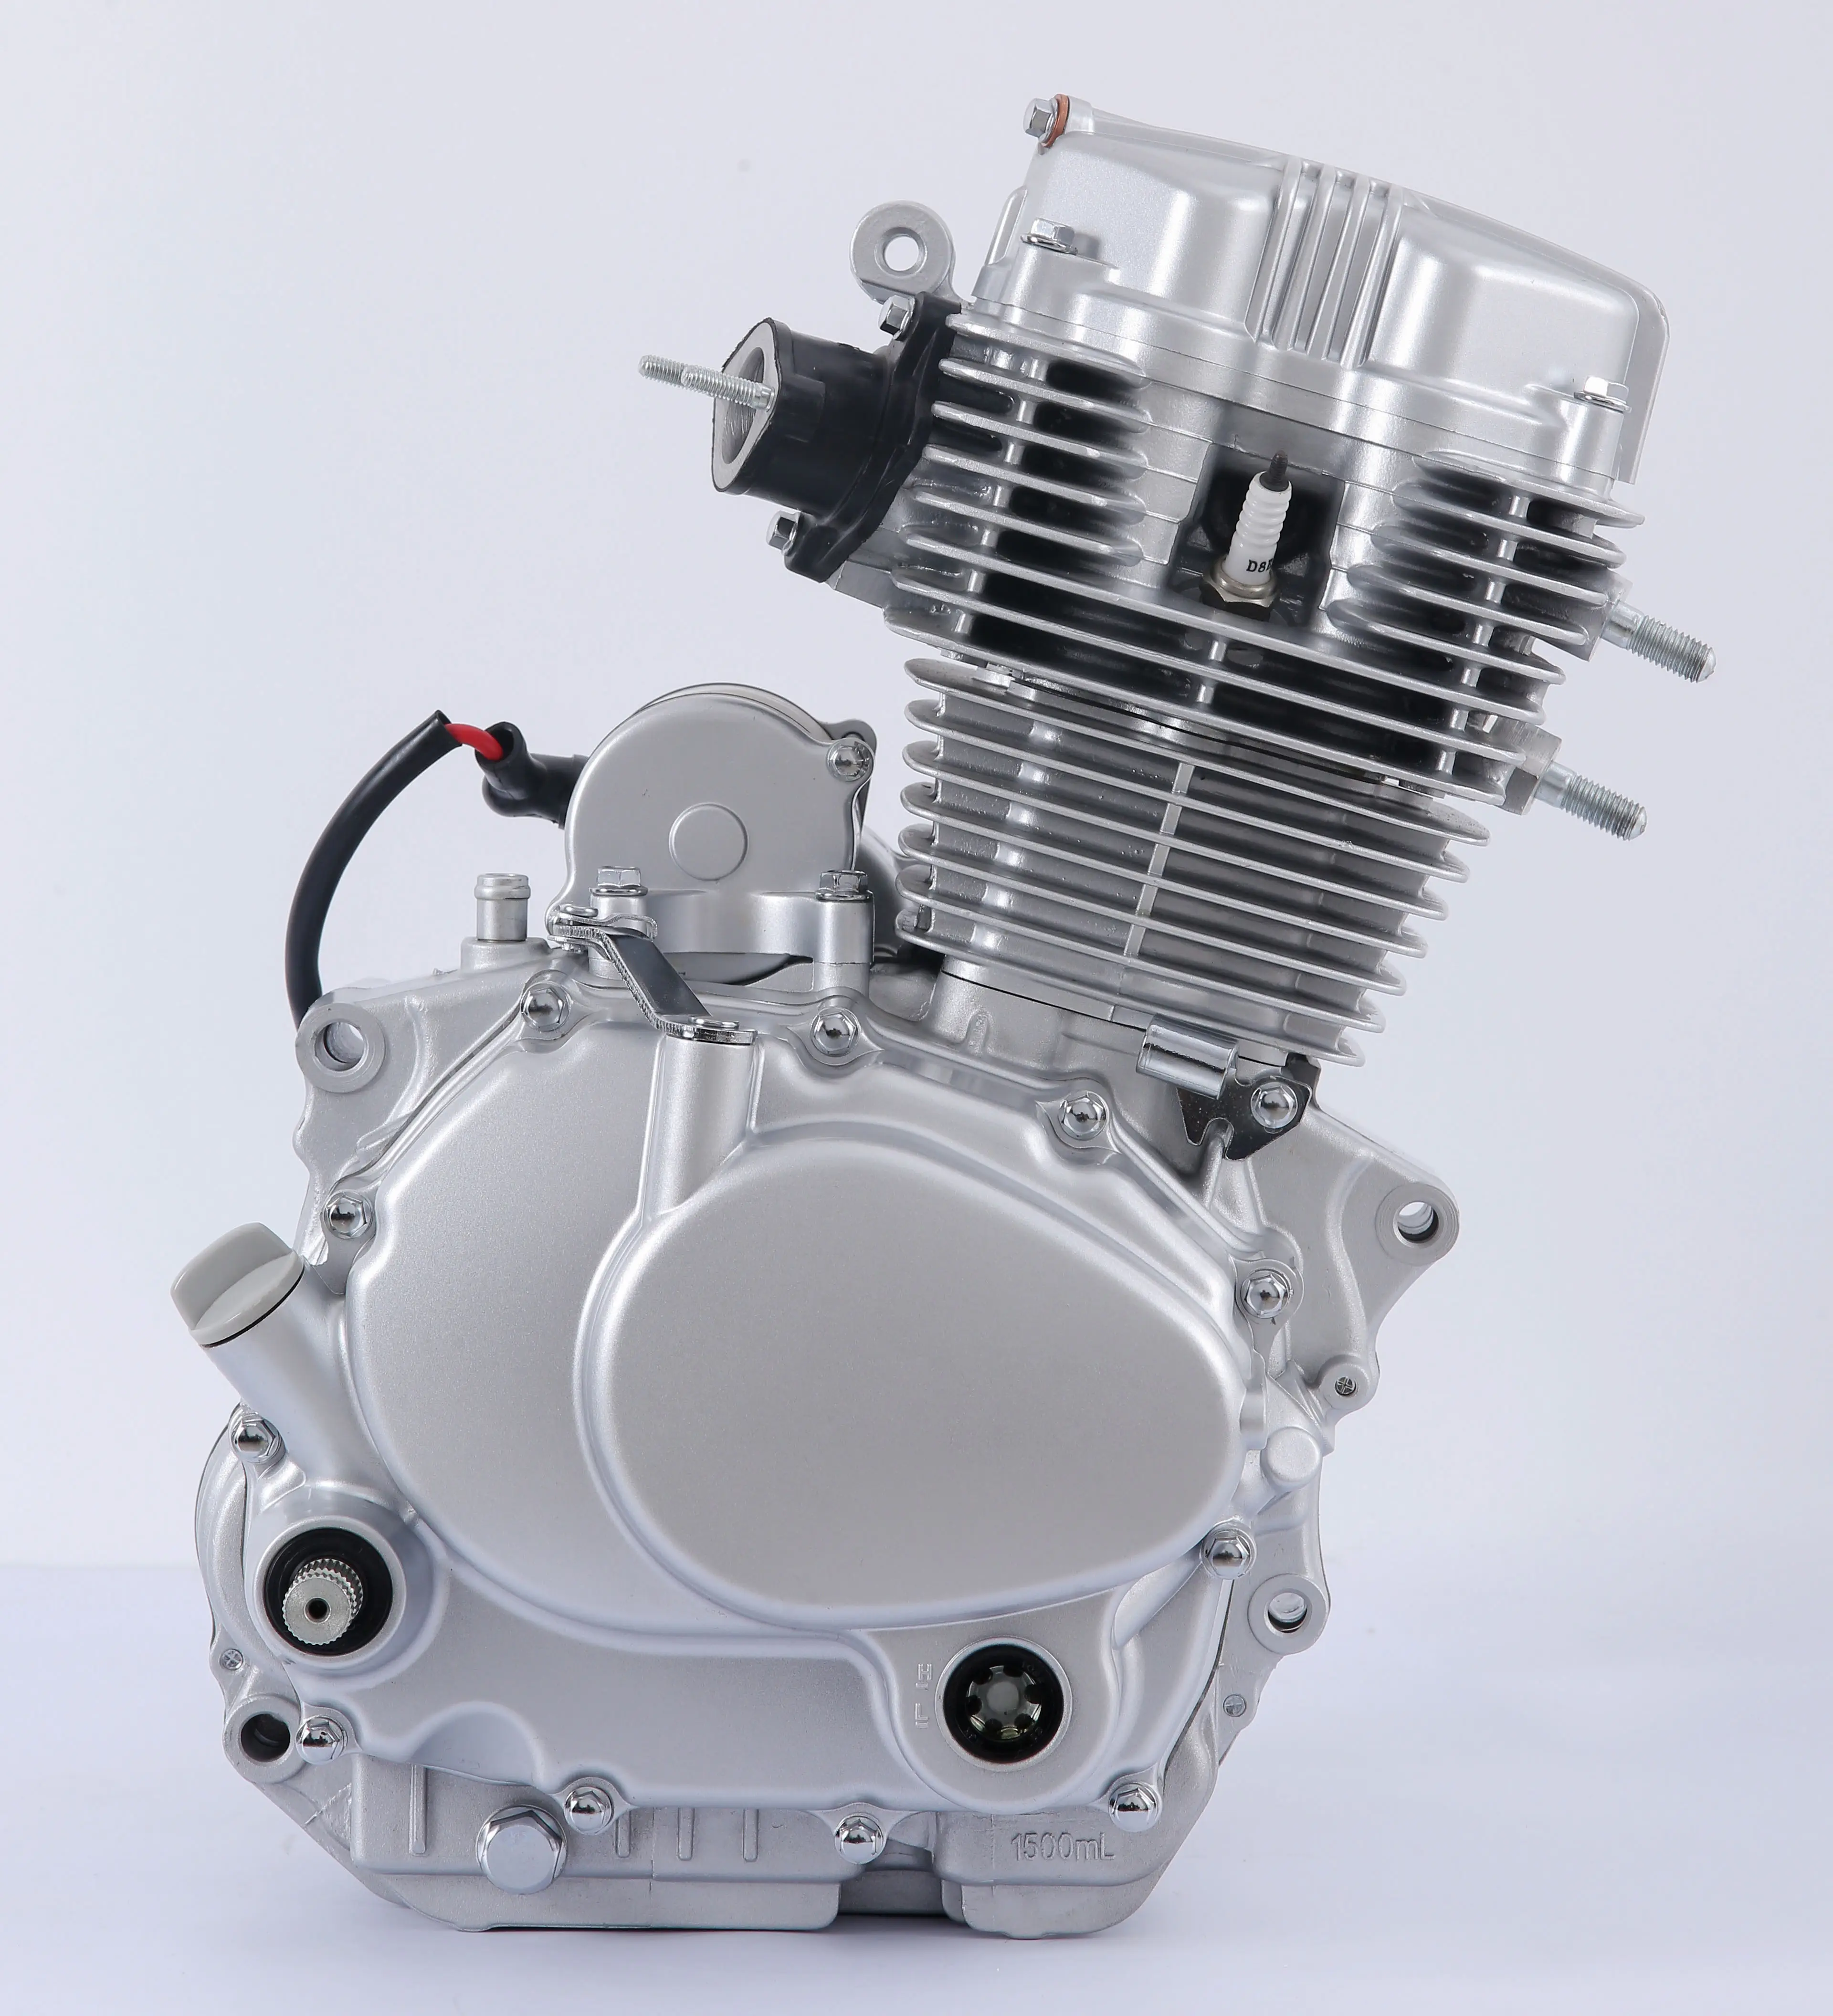 CQHZJ High Quality Chinese Motorcycle Tricycle Engine 200cc 250cc 300cc Engines Assembly